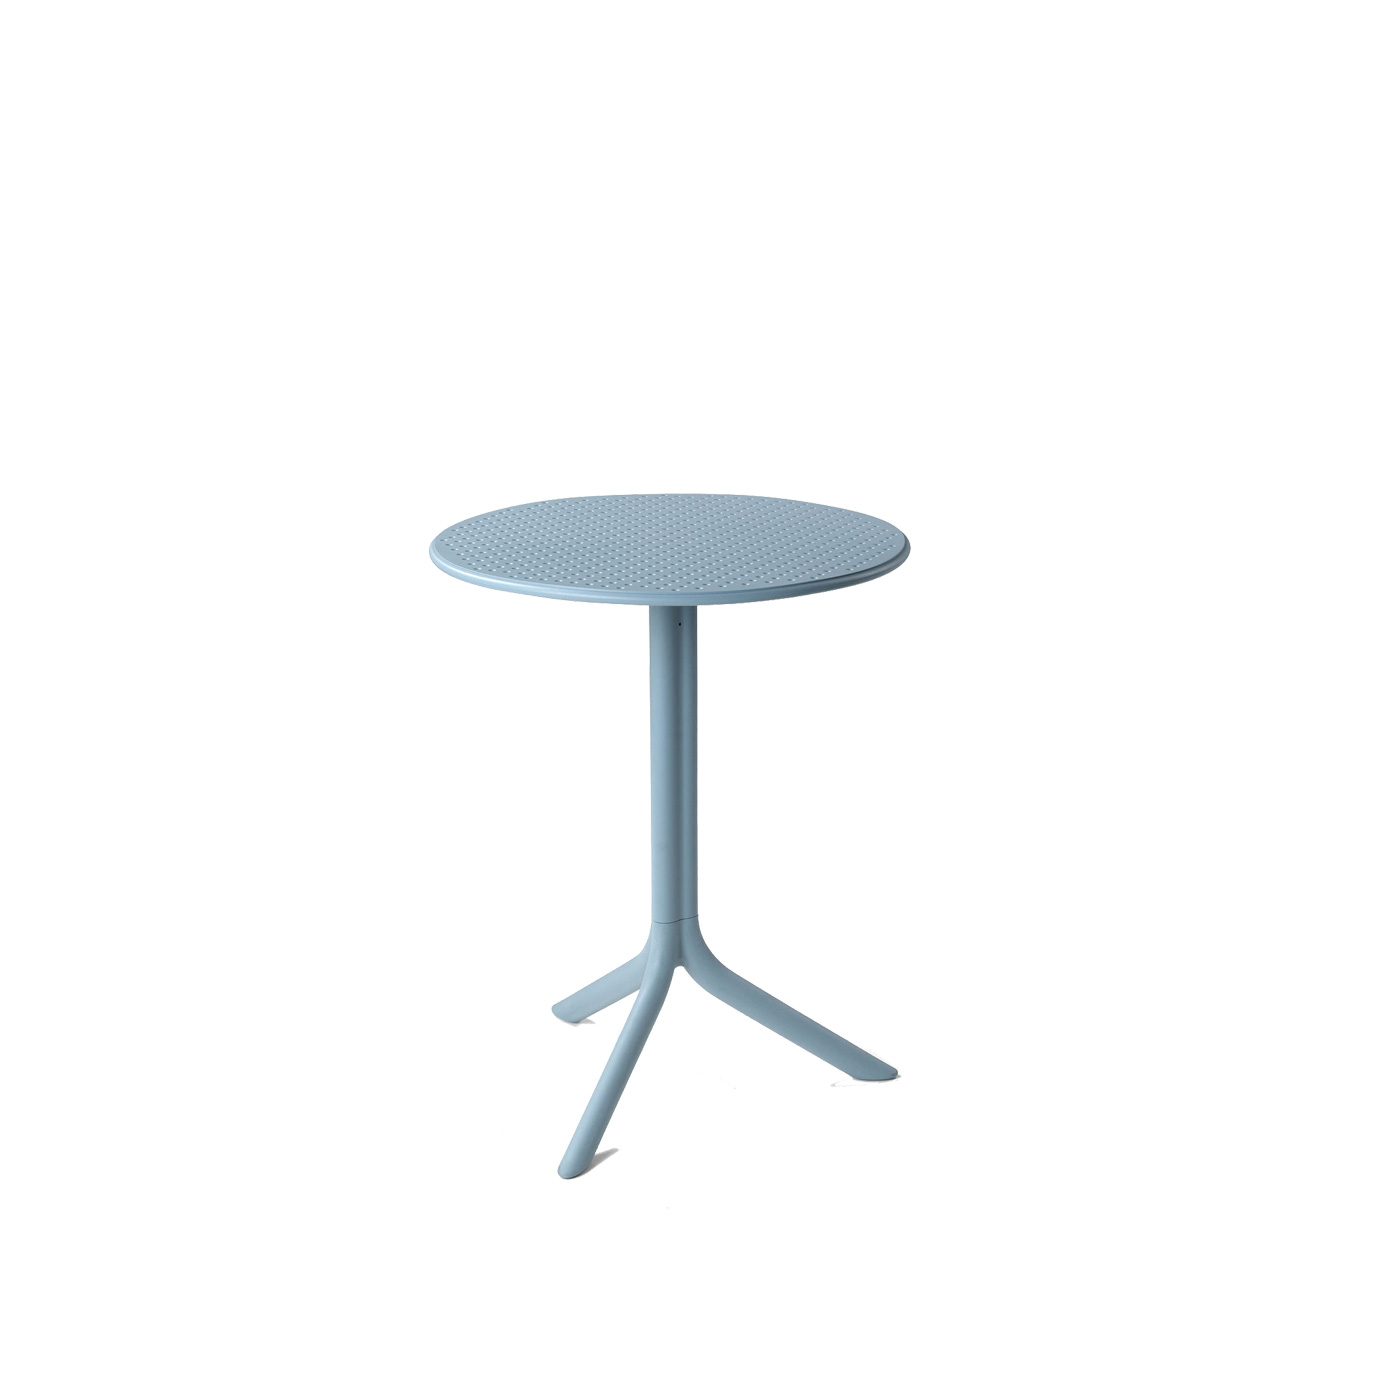 Small Garden Side Tables - Shop Online Now With UK Mainland Delivery